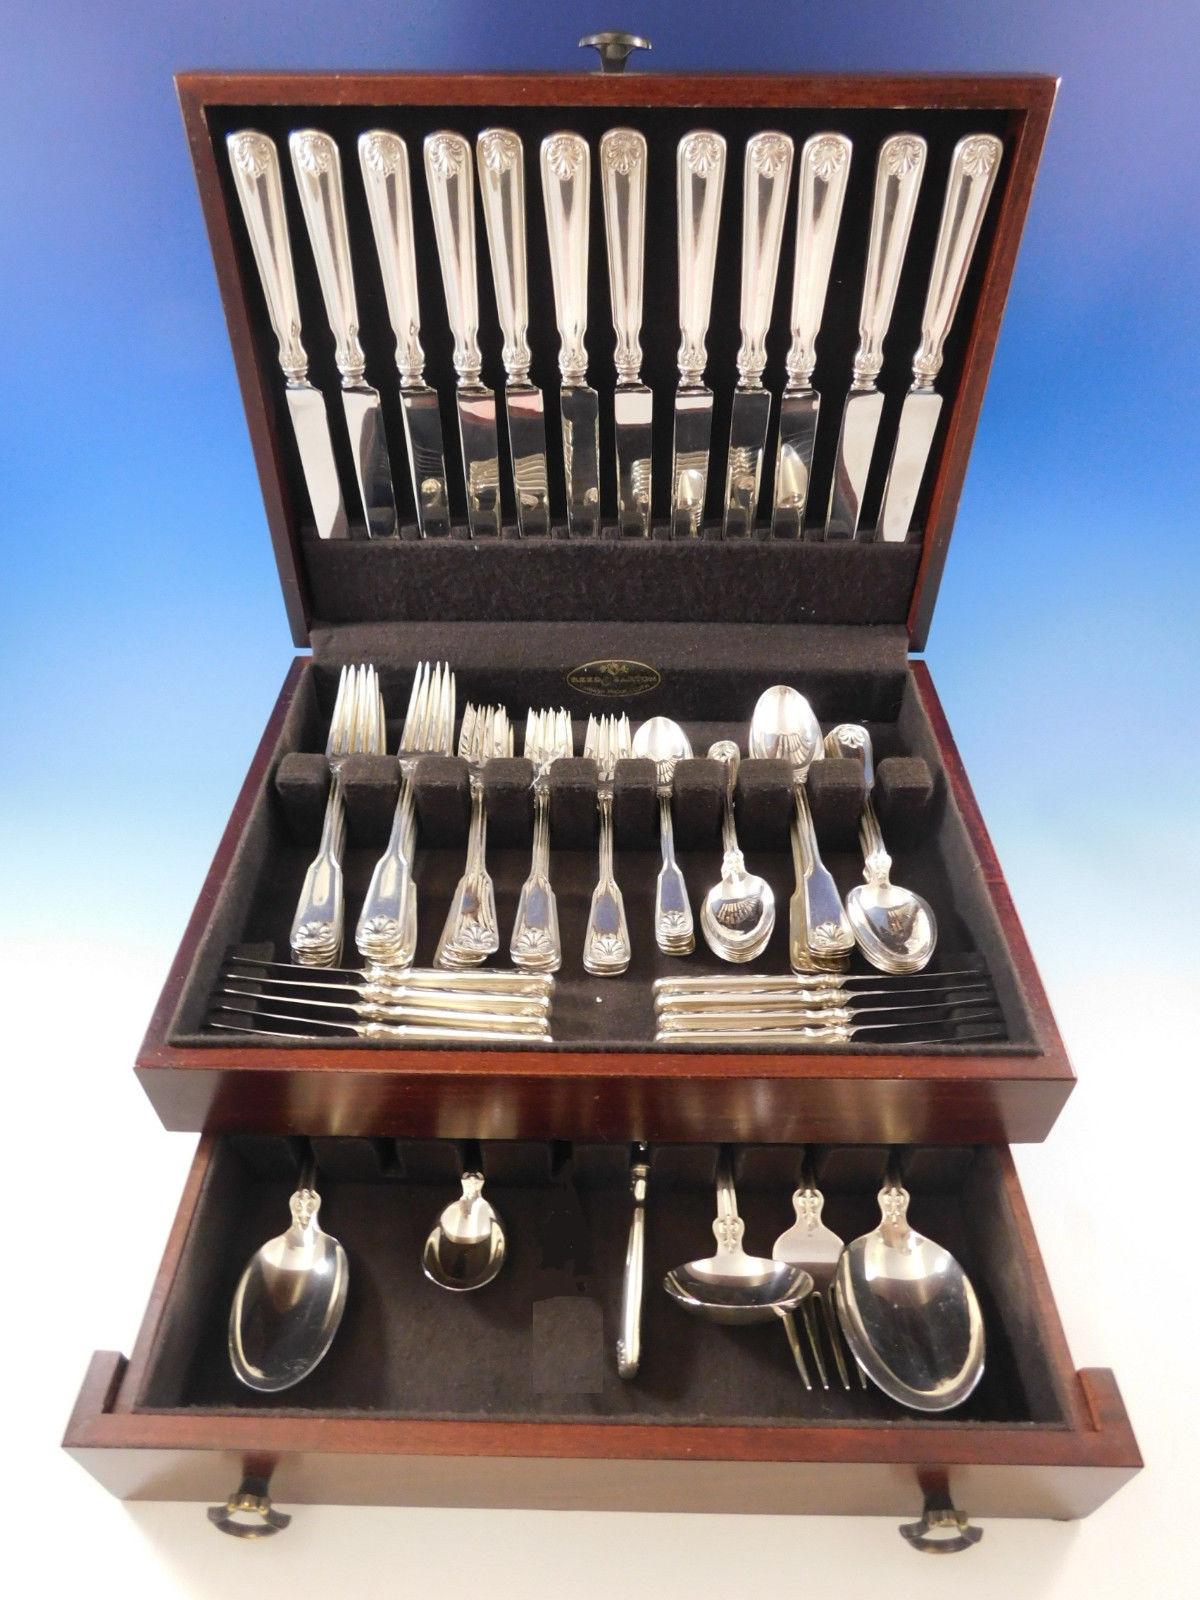 Superb Dinner Size Shell & Thread by Tiffany & Co. sterling silver flatware set of 78 pieces. This set includes:

12 dinner size knives, 10 1/4